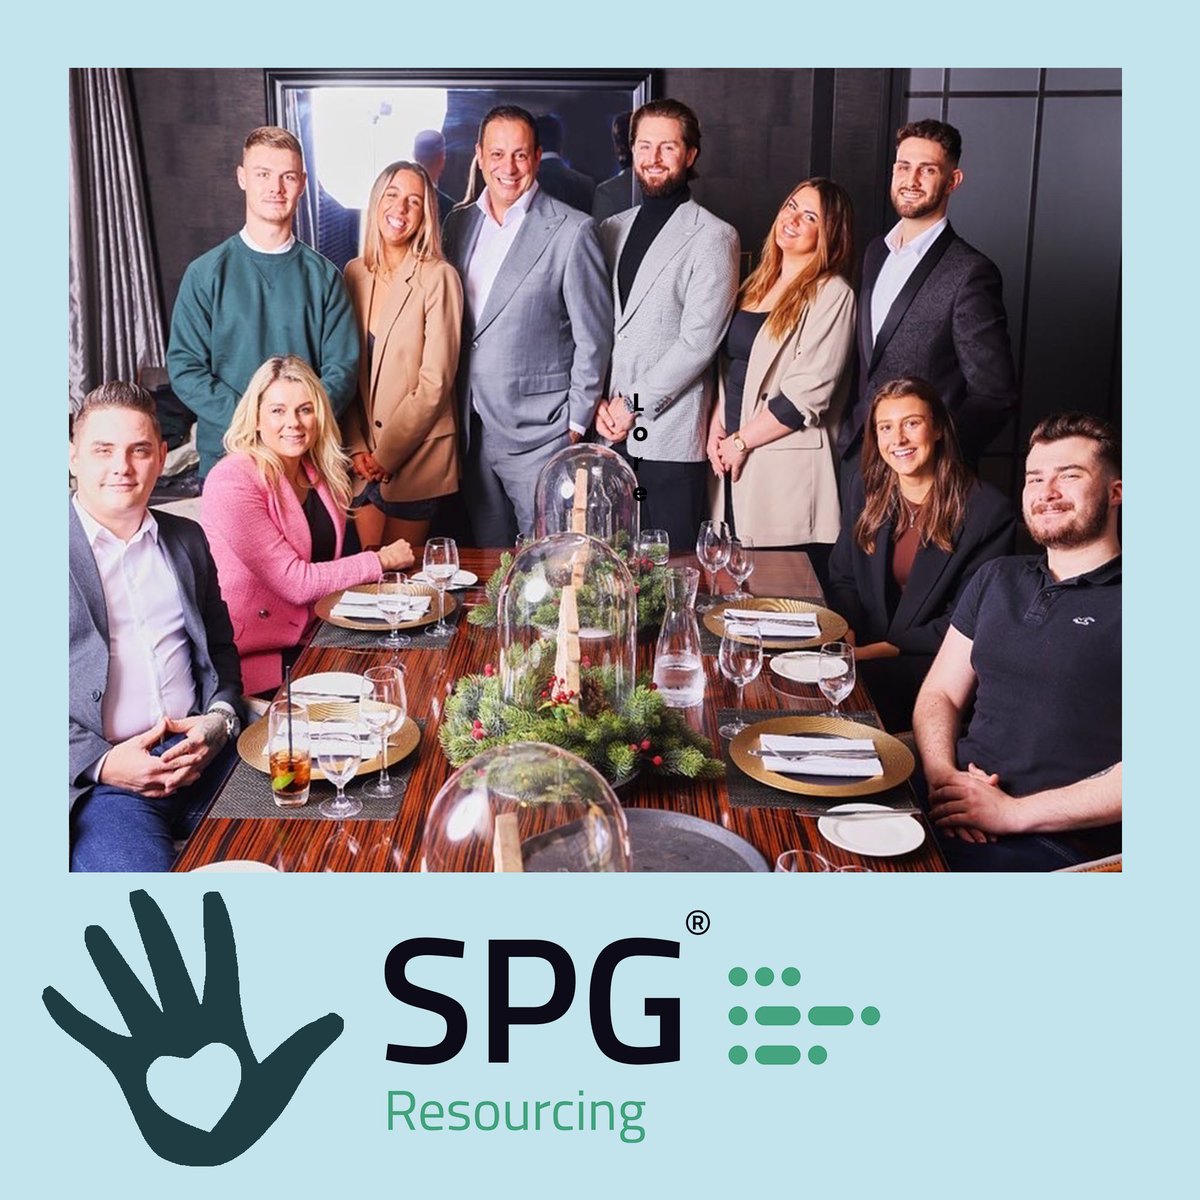 SPG Resourcing will be joining us at this years Yorkshire Children of Courage Awards as a brand new sponsor . Thank you for helping to make this event possible!! Details of which categories our sponsors will be presenting will be announced soon. Watch this space!! #charitysponsor